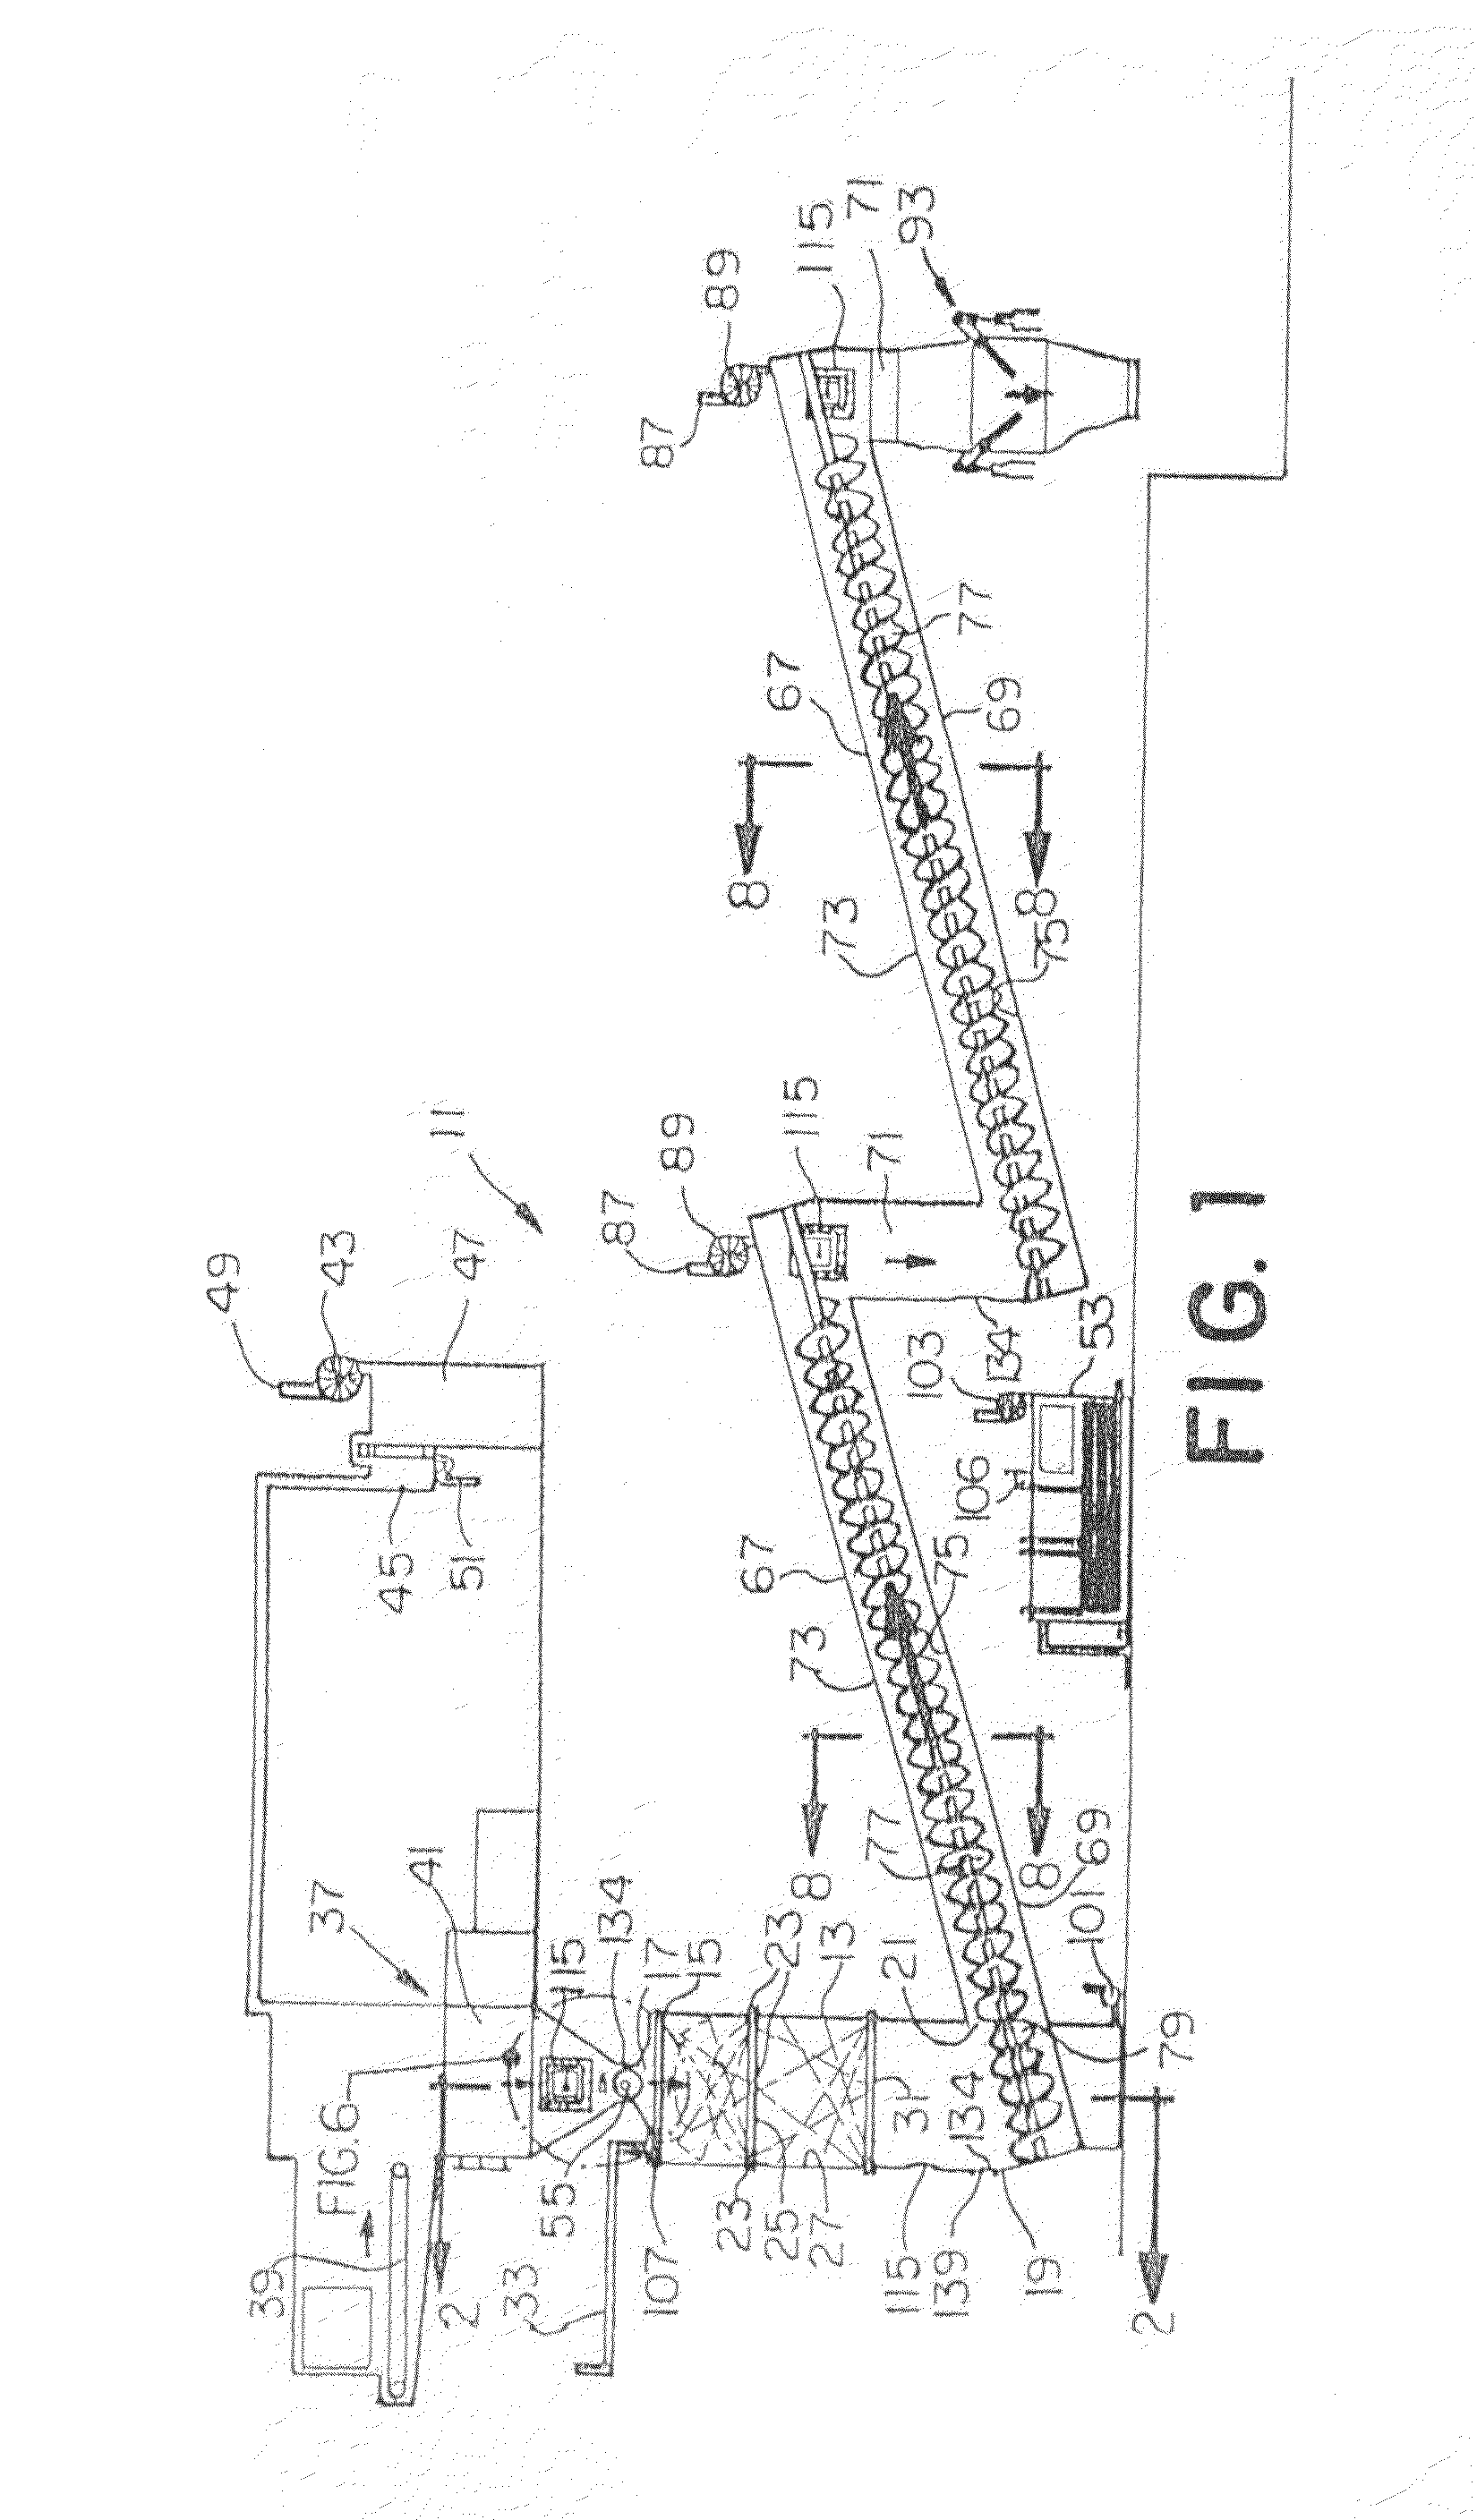 Waste treatment apparatus and method